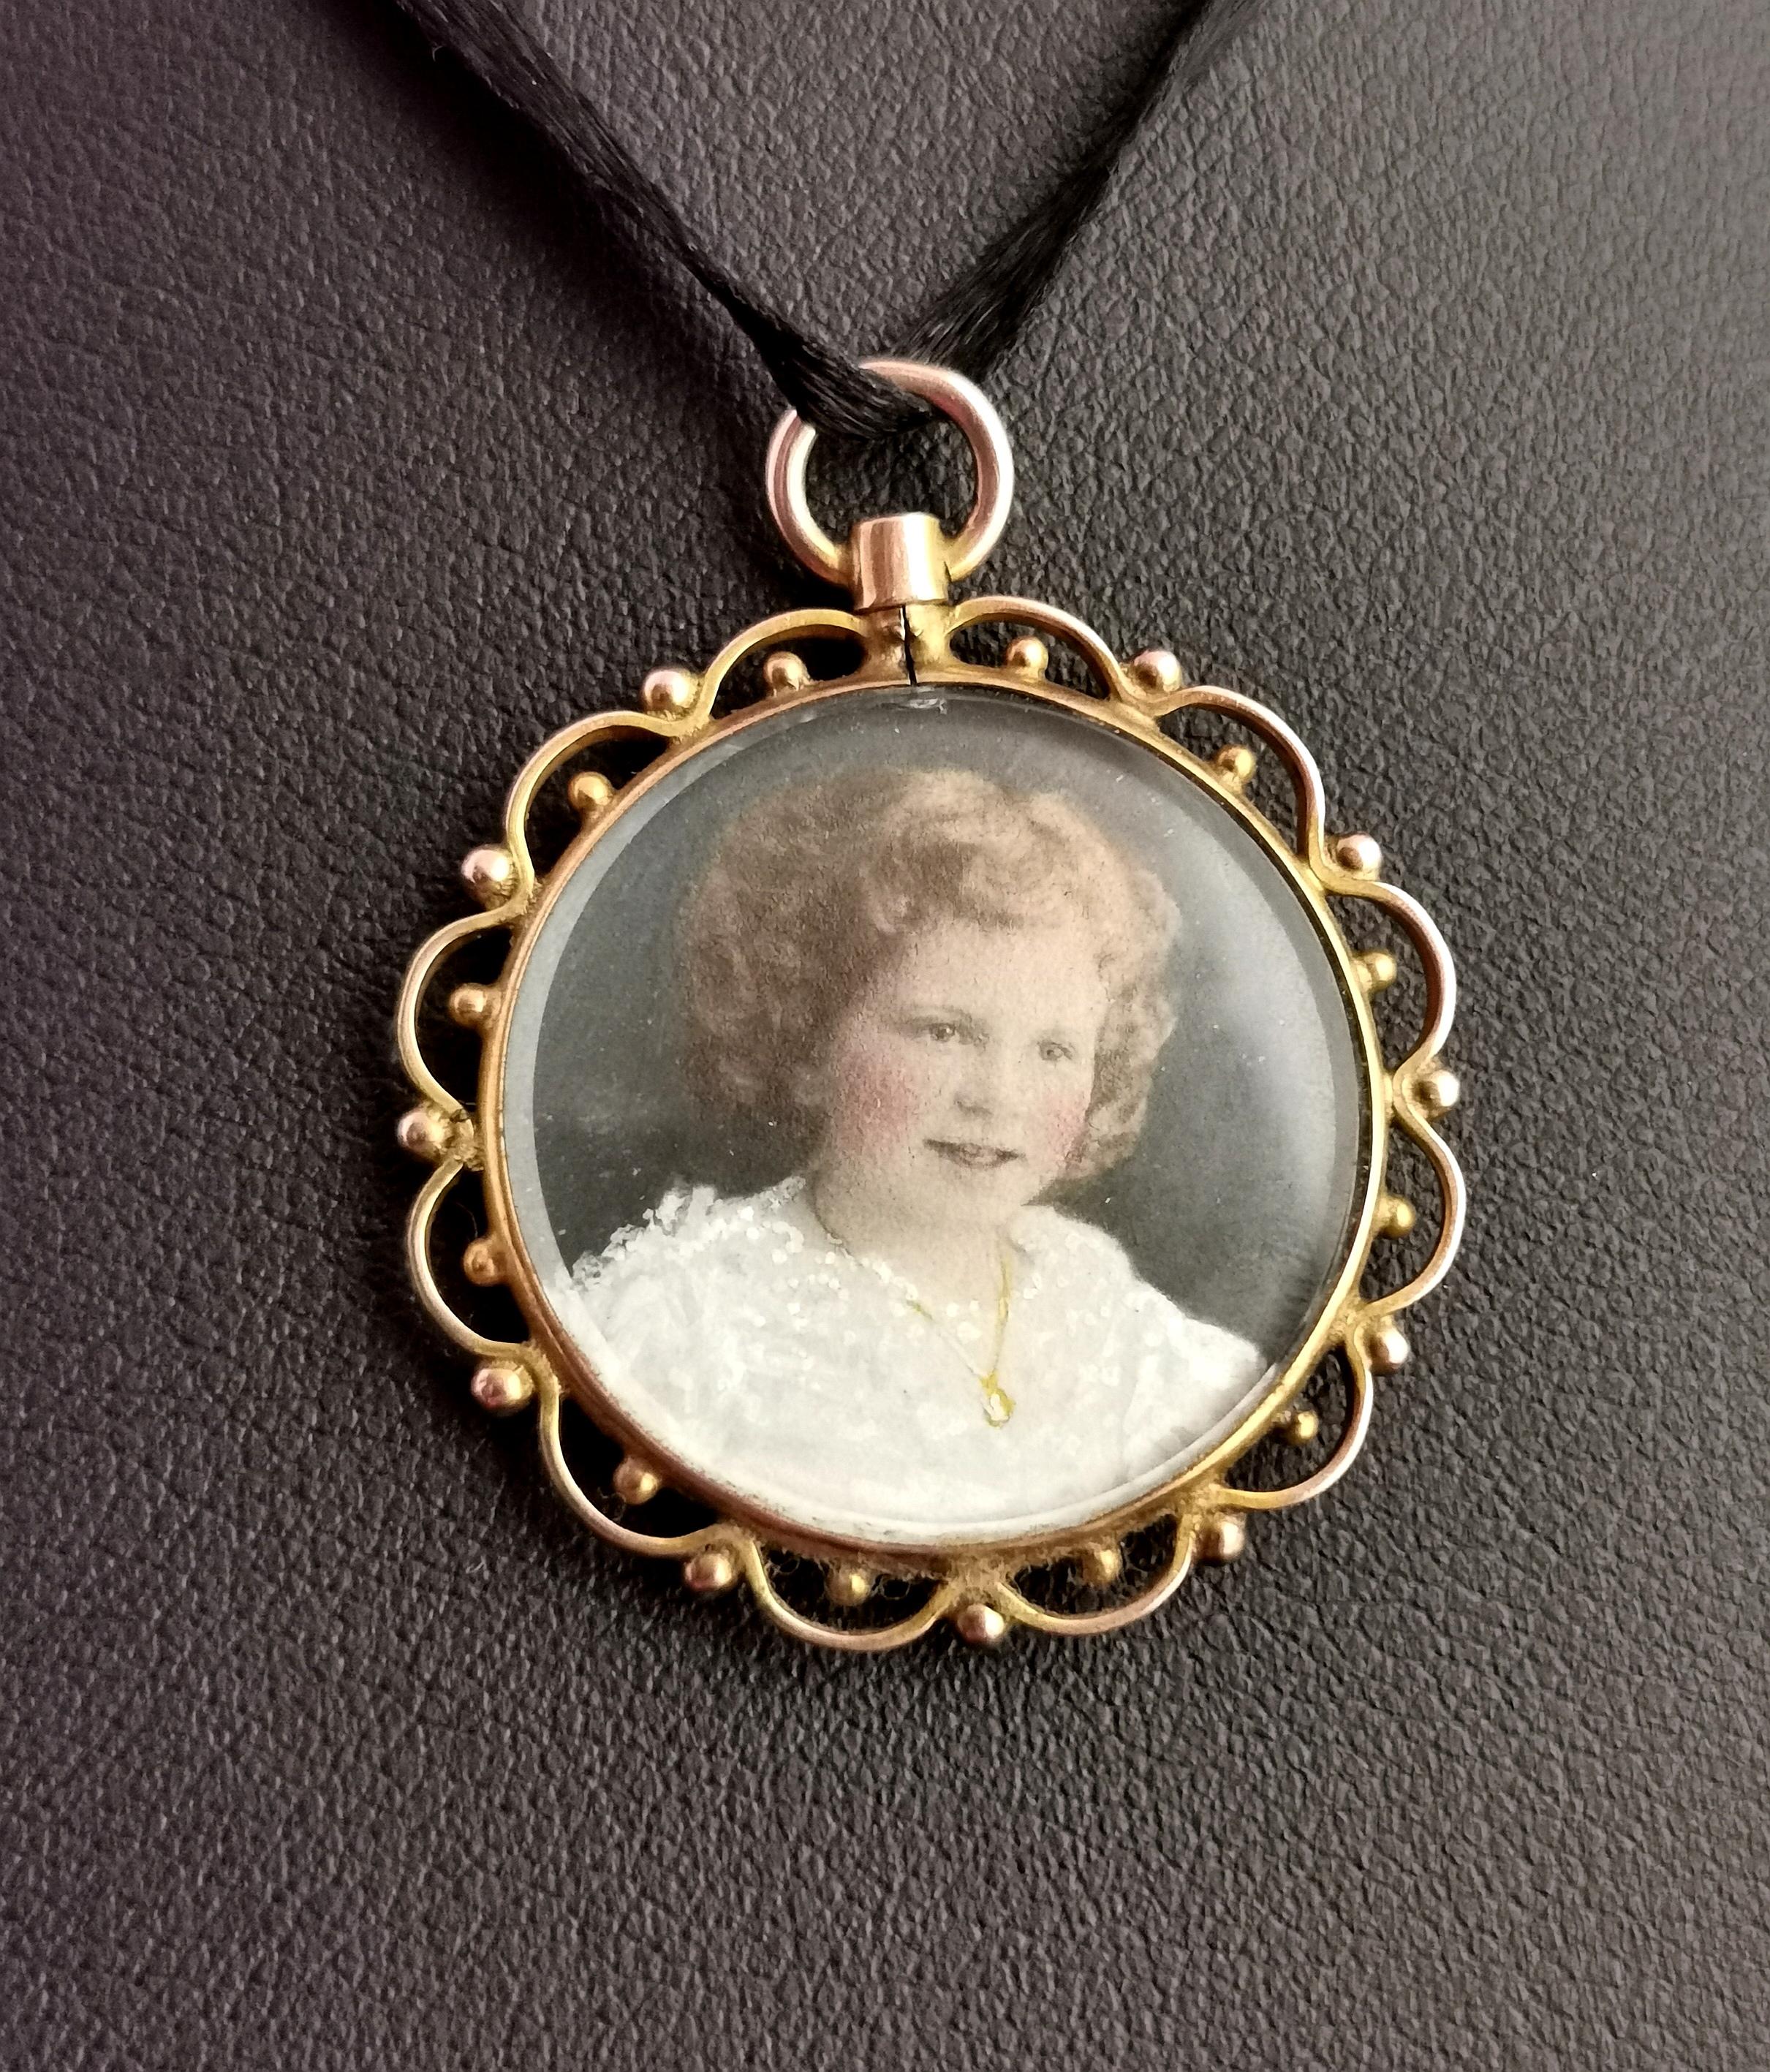 A gorgeous antique, Victorian 9 karat yellow gold portrait miniature mourning pendant.

A tragically beautiful piece created in memory of a beautiful young girl.

The pendant locket is a circular shape with glazed panels front and back, it has a